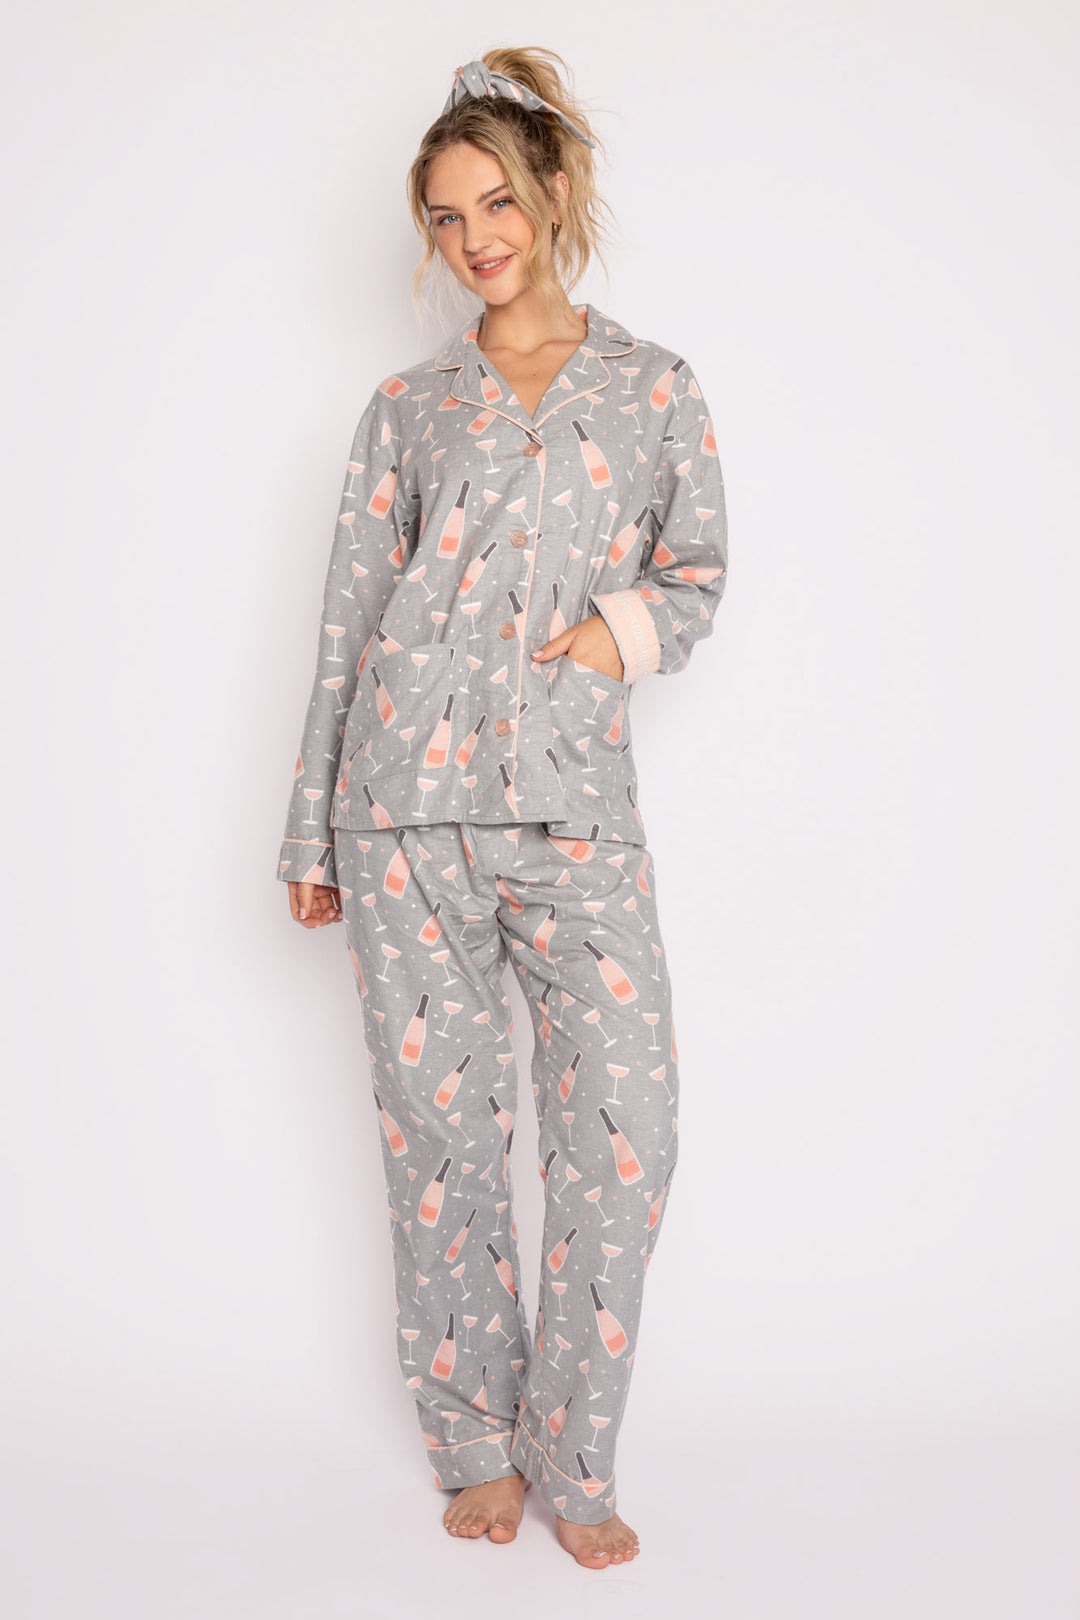 Cotton flannel pj set in silver-pink champagne print. Embroidered 'Sippin' bubbly, feelin' lovely' & hair wrap. (7231869878372)